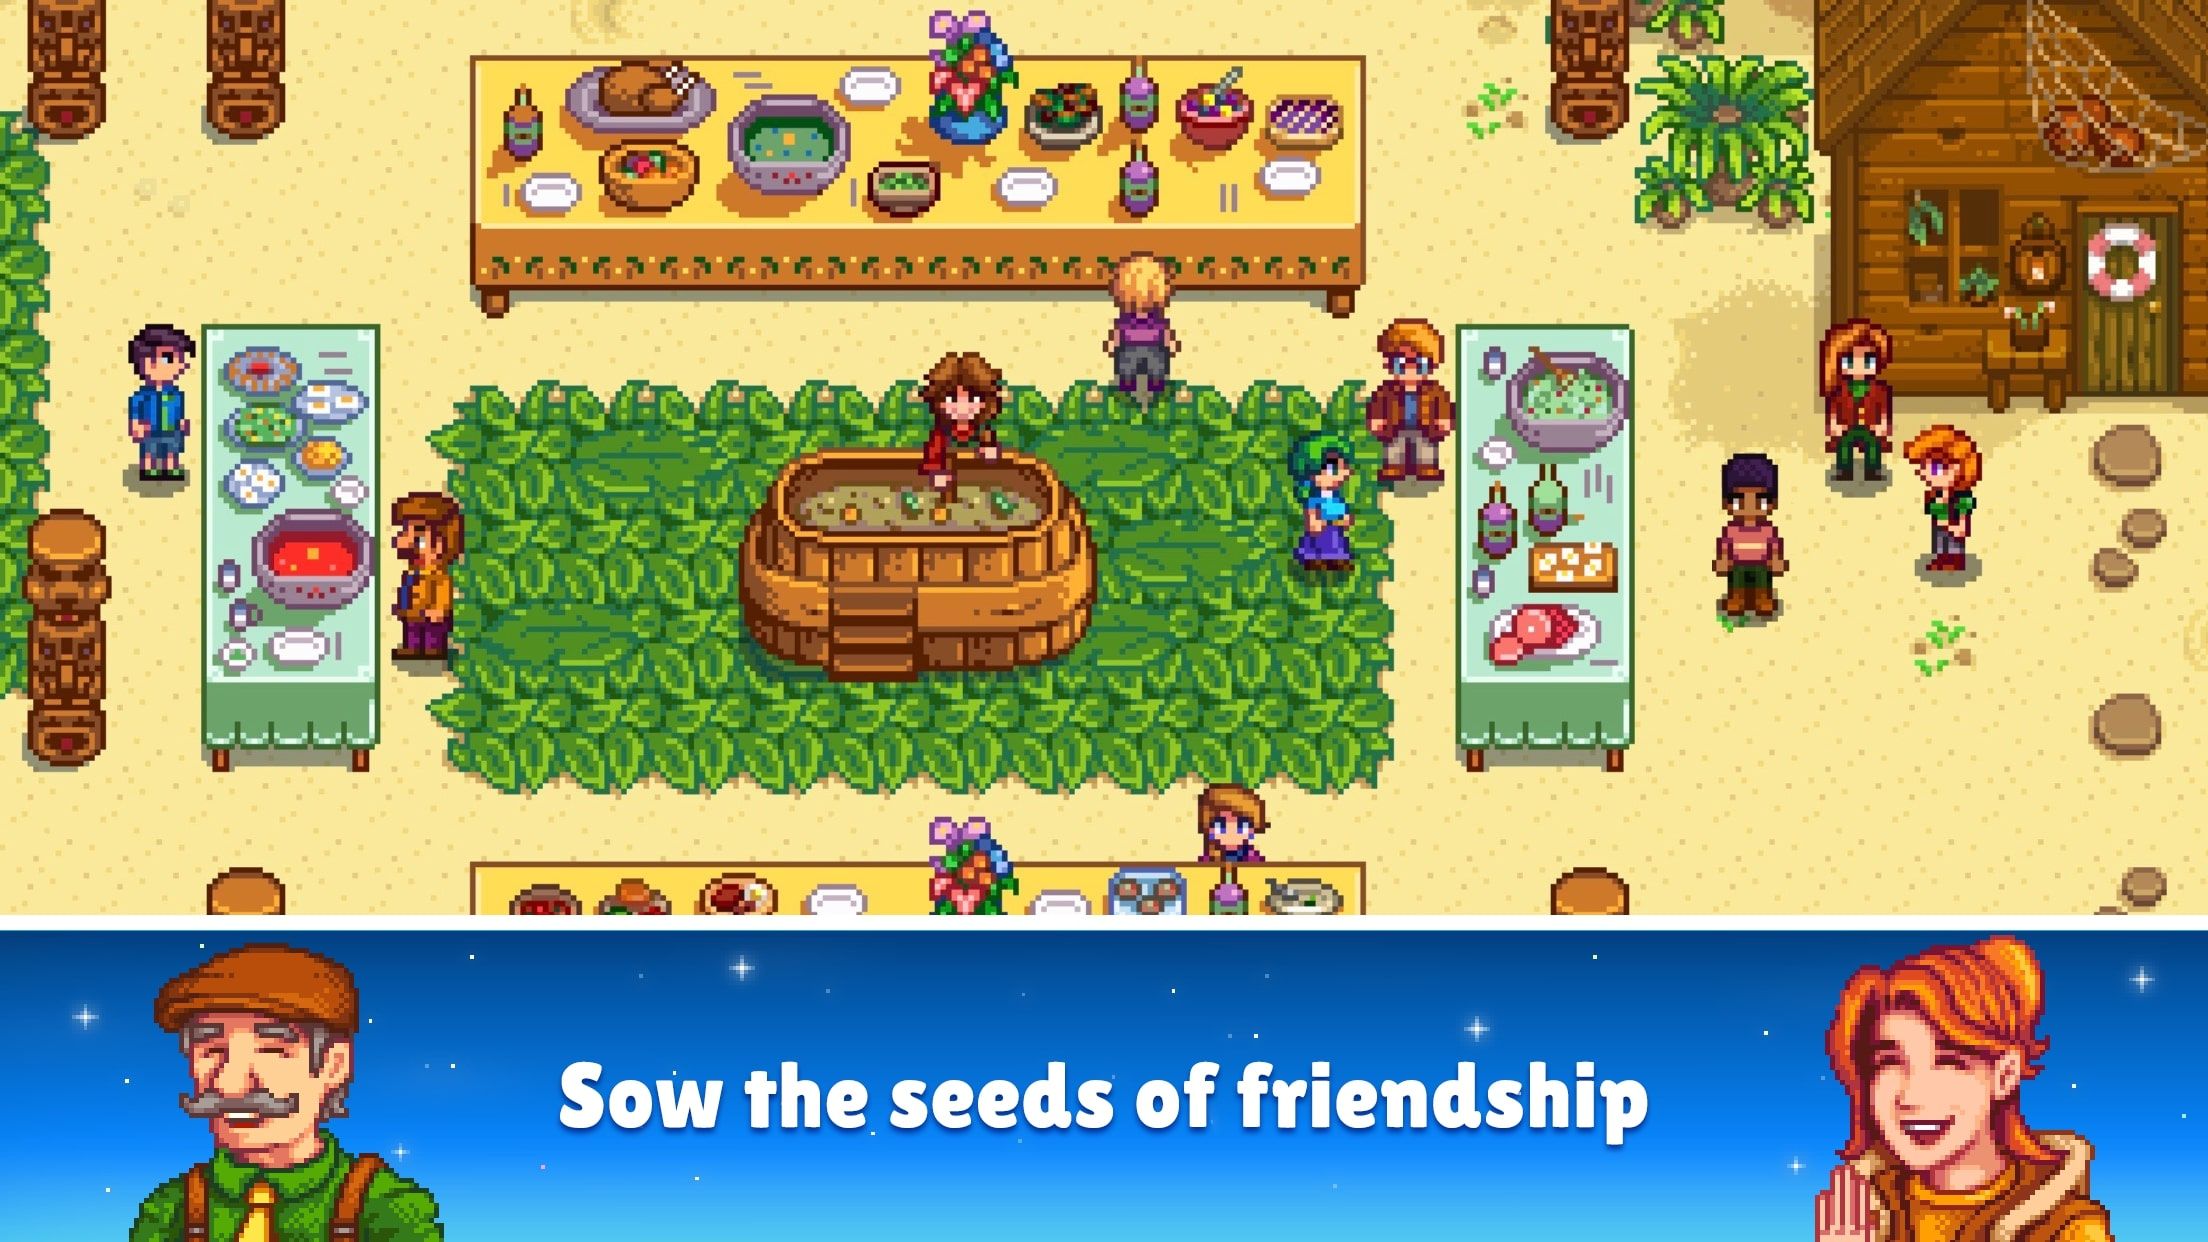 Stardew Valley showing how to build relationships with others